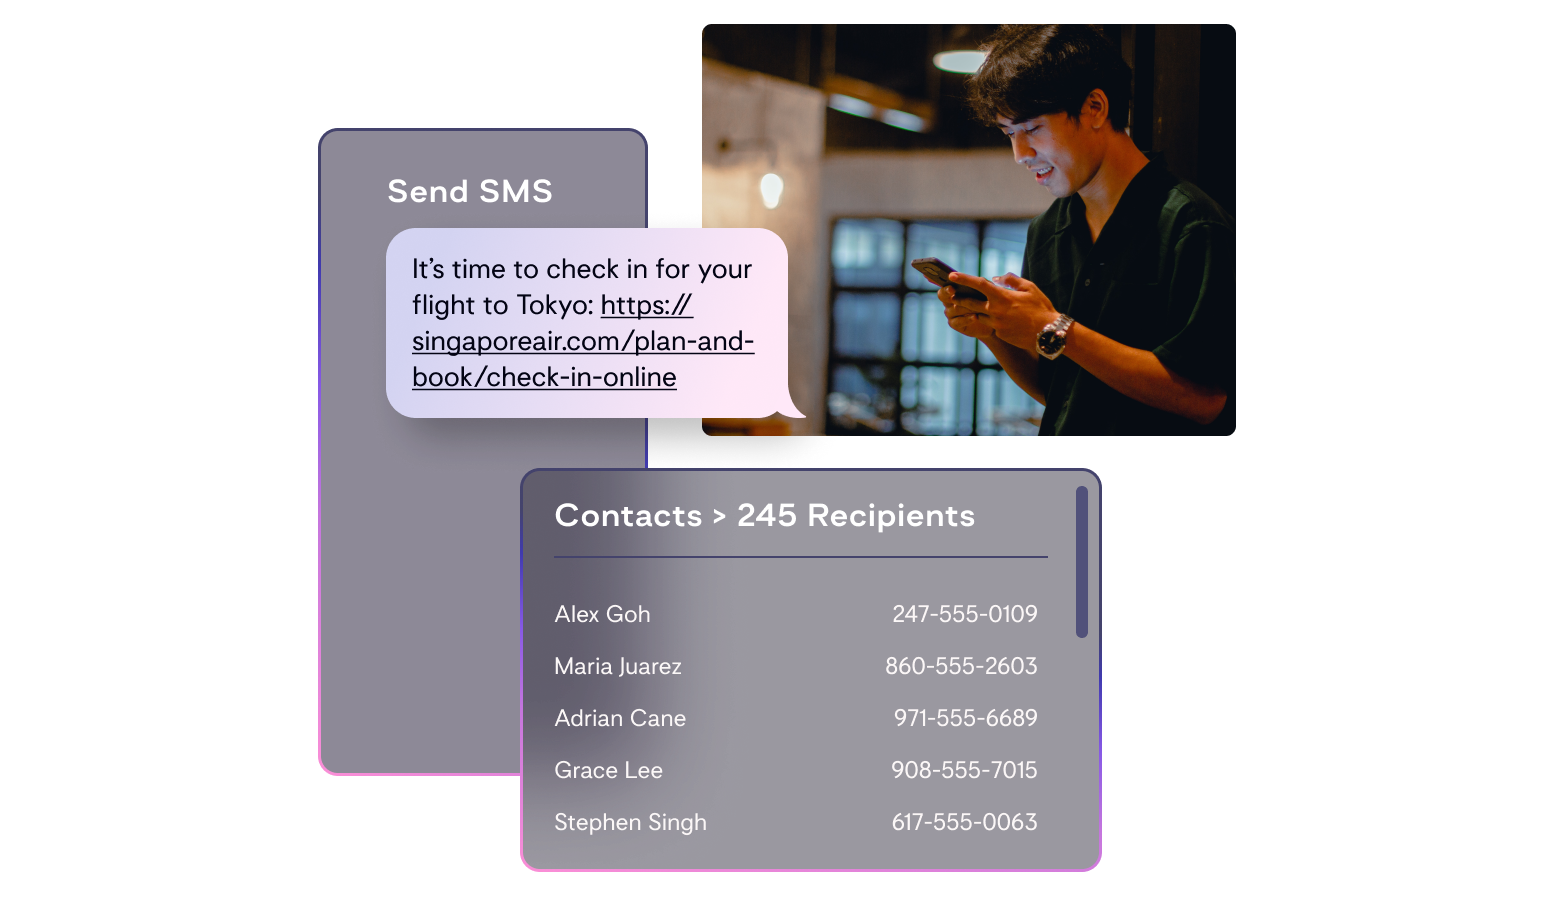 Send messages to contacts